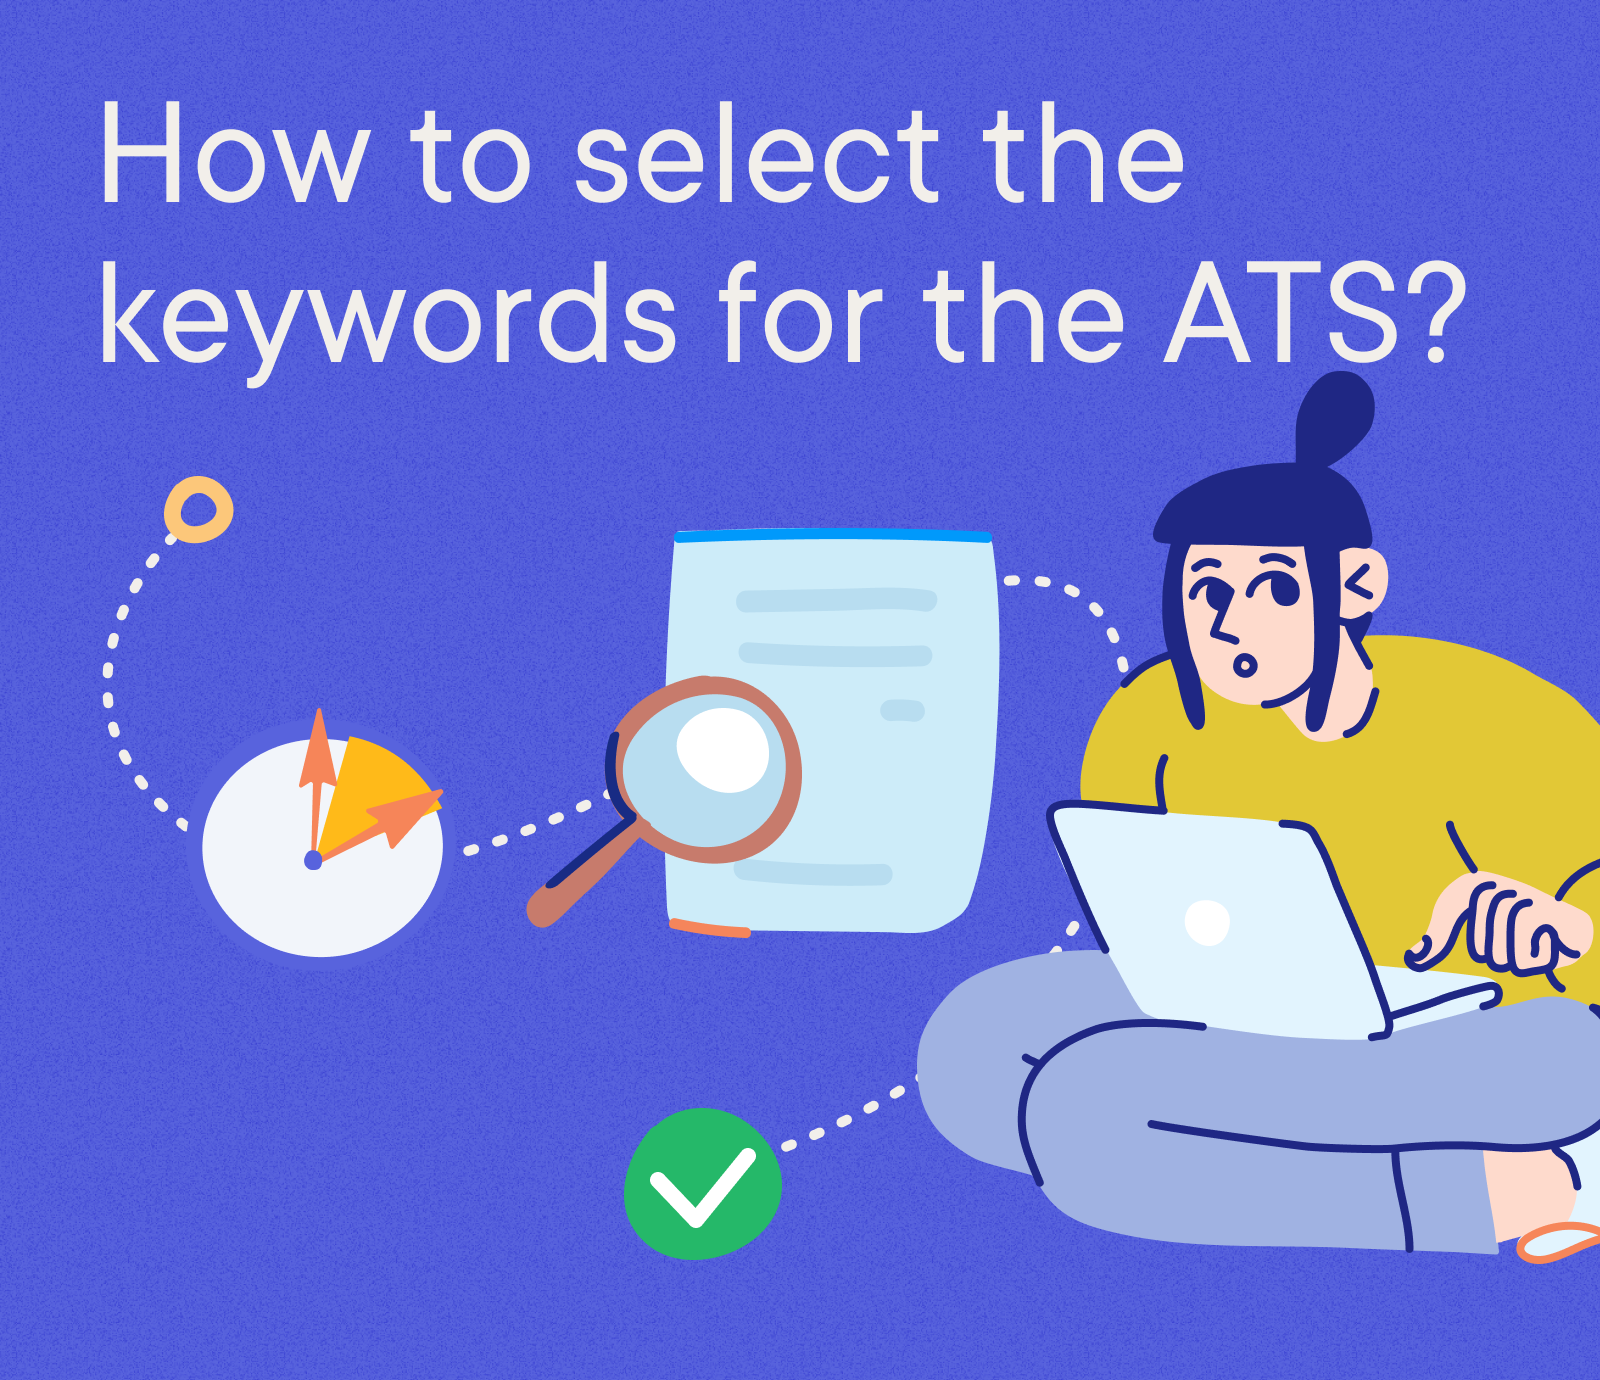 Bookkeeper - How to select the keywords for the ATS?